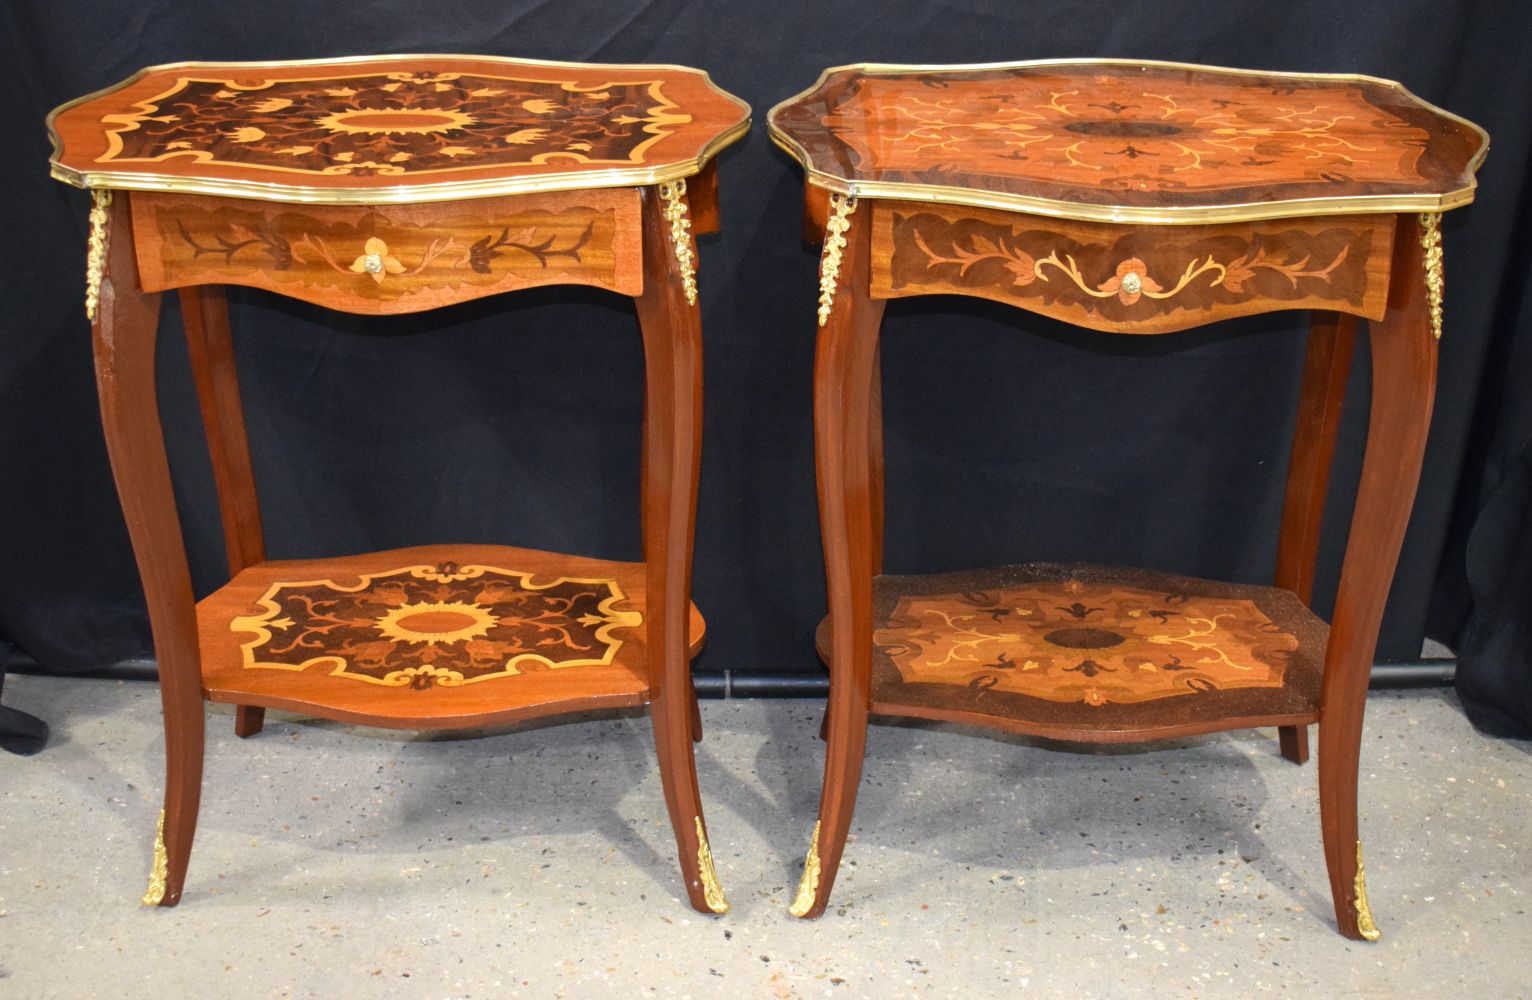 A near pair of Baroque style inlaid Oval 1 drawer tables 72 x 62 x 47 cm (2)